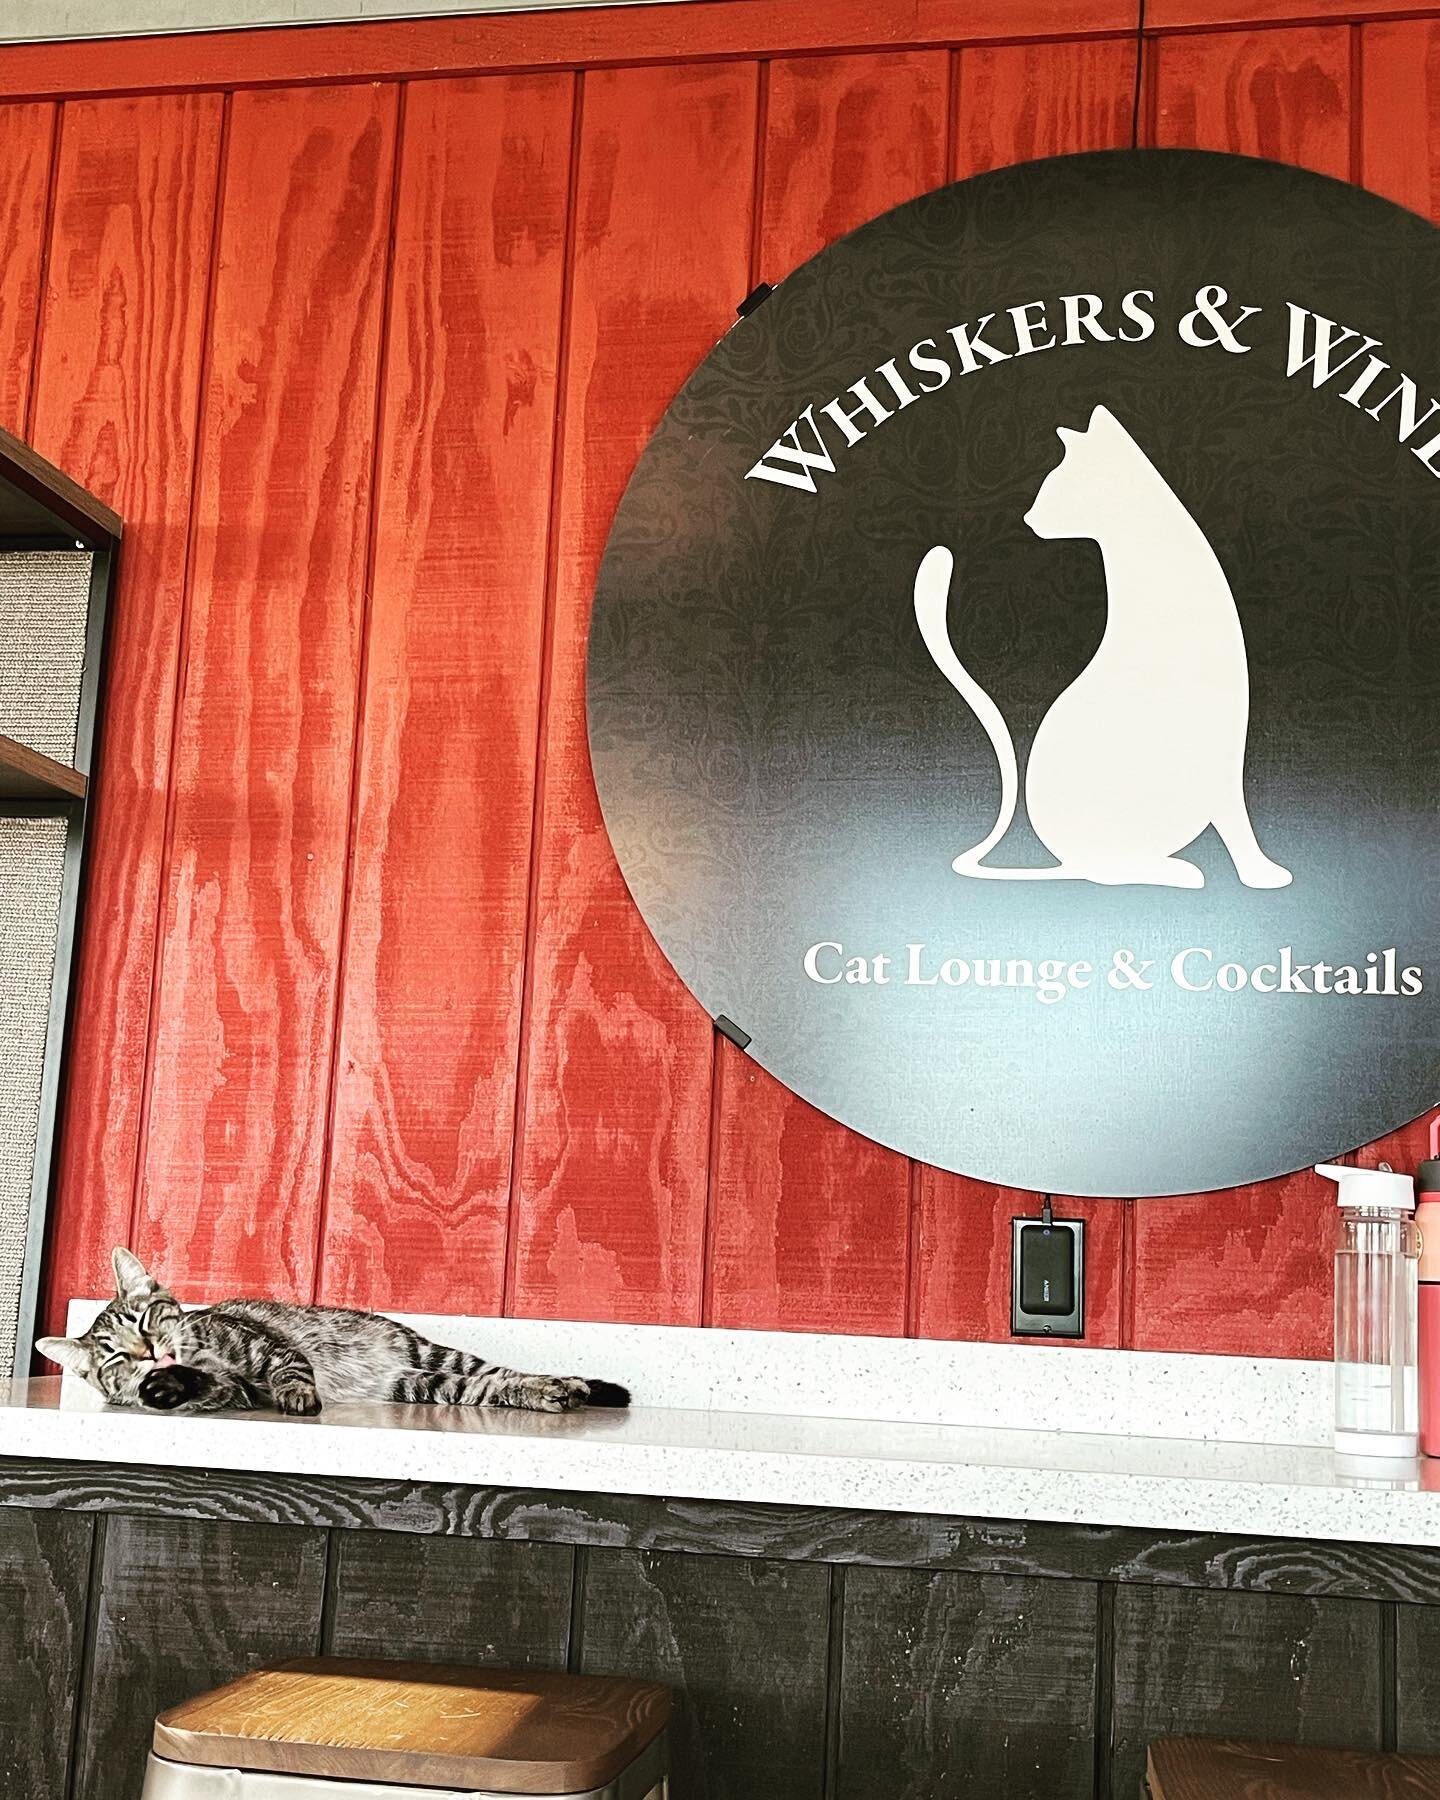 Recently, #thehubby and I discovered the #mostadorable #amazing place!! It&rsquo;s @whiskersandwinebar and I&rsquo;d like to invite everyone to come over and experience it 🥰. You can pet (and adopt) the sweetest #catsandkittens &hellip;and have some